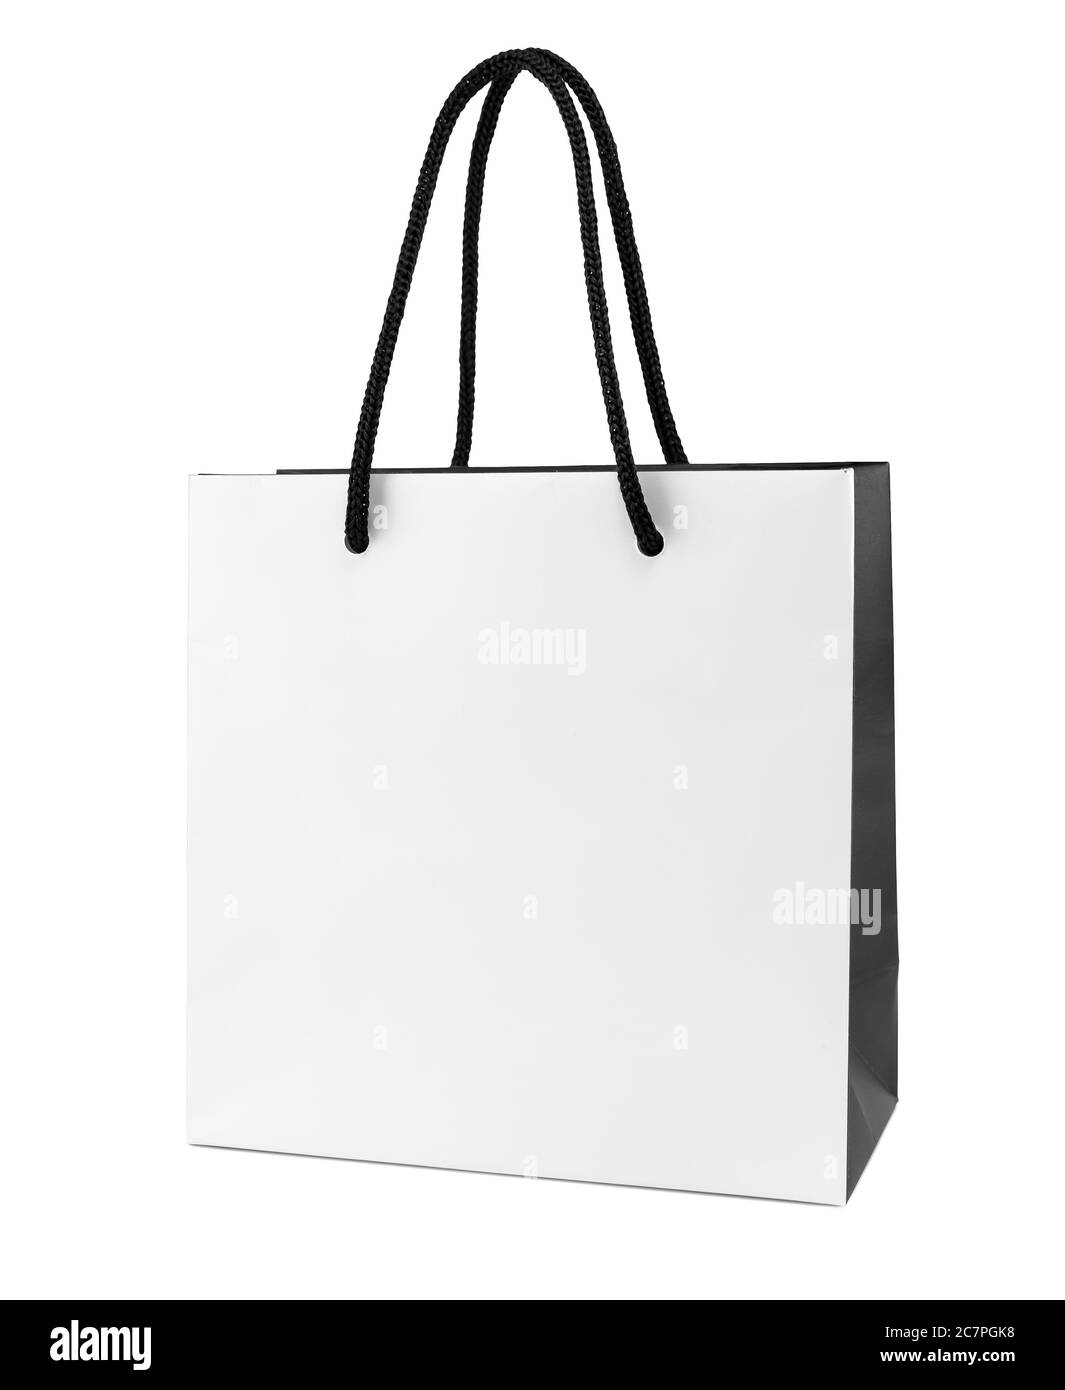 White and black paper shopping bag isolated Stock Photo